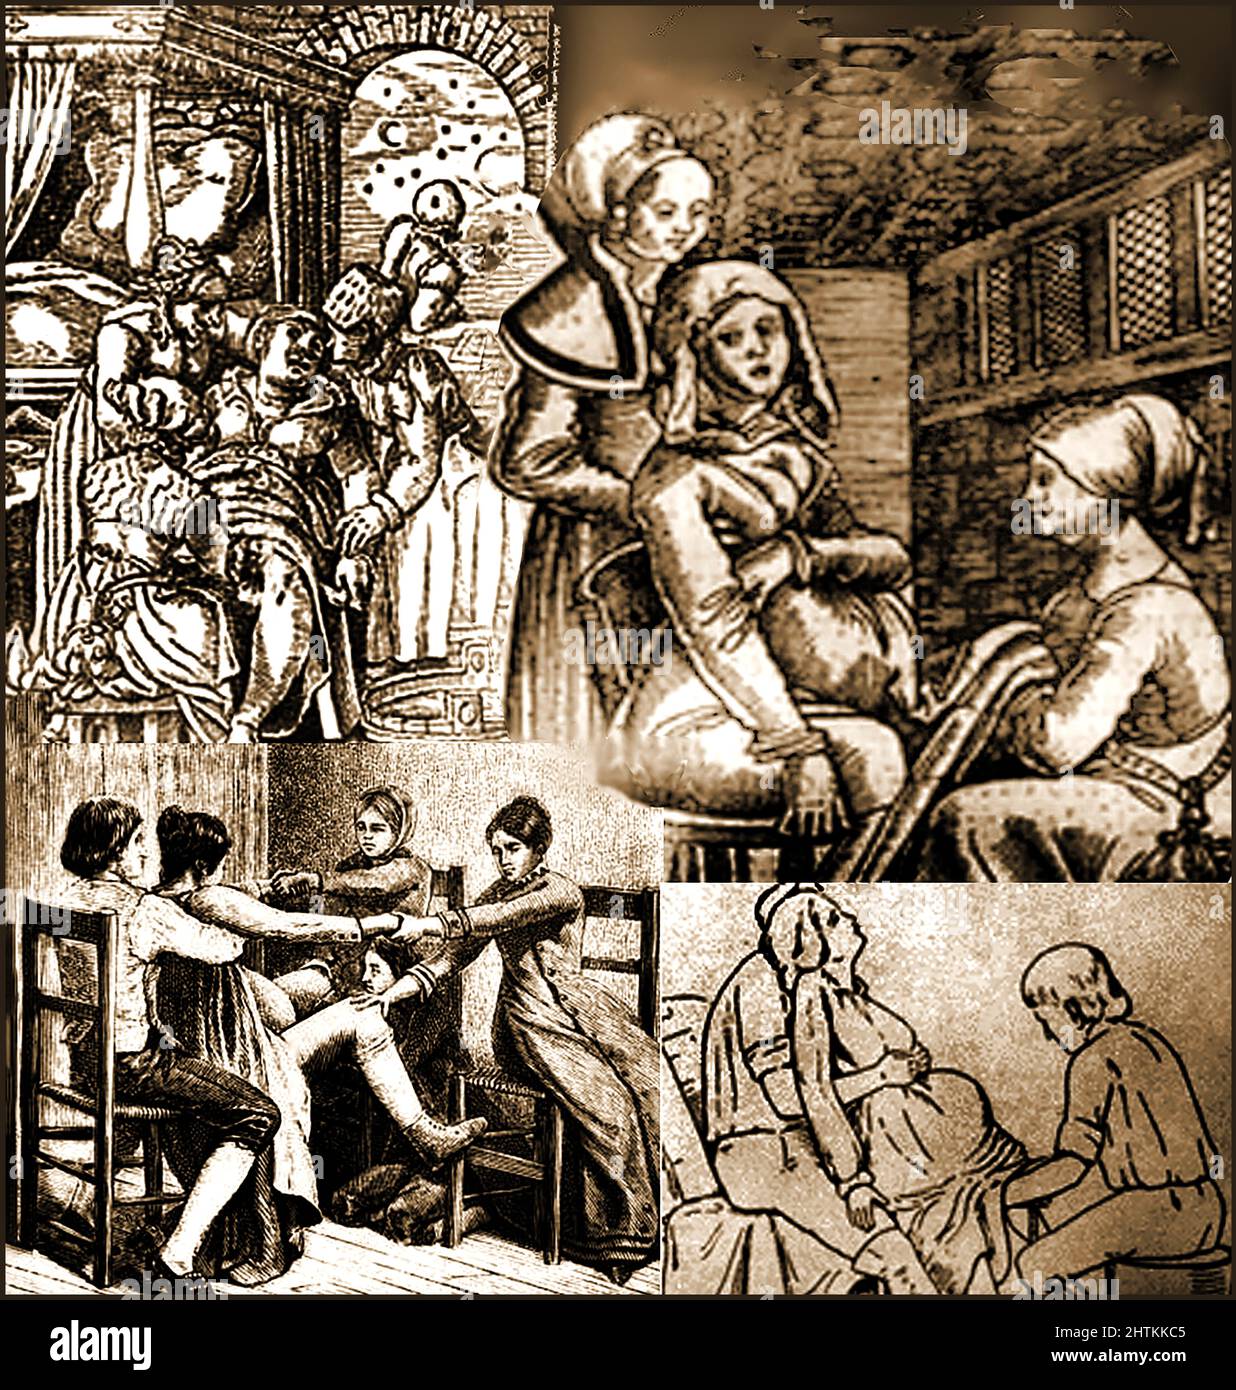 Midwifery through the ages - A composite view of 12th century, medieval, Victorian and early 20th century childbirth. Stock Photo